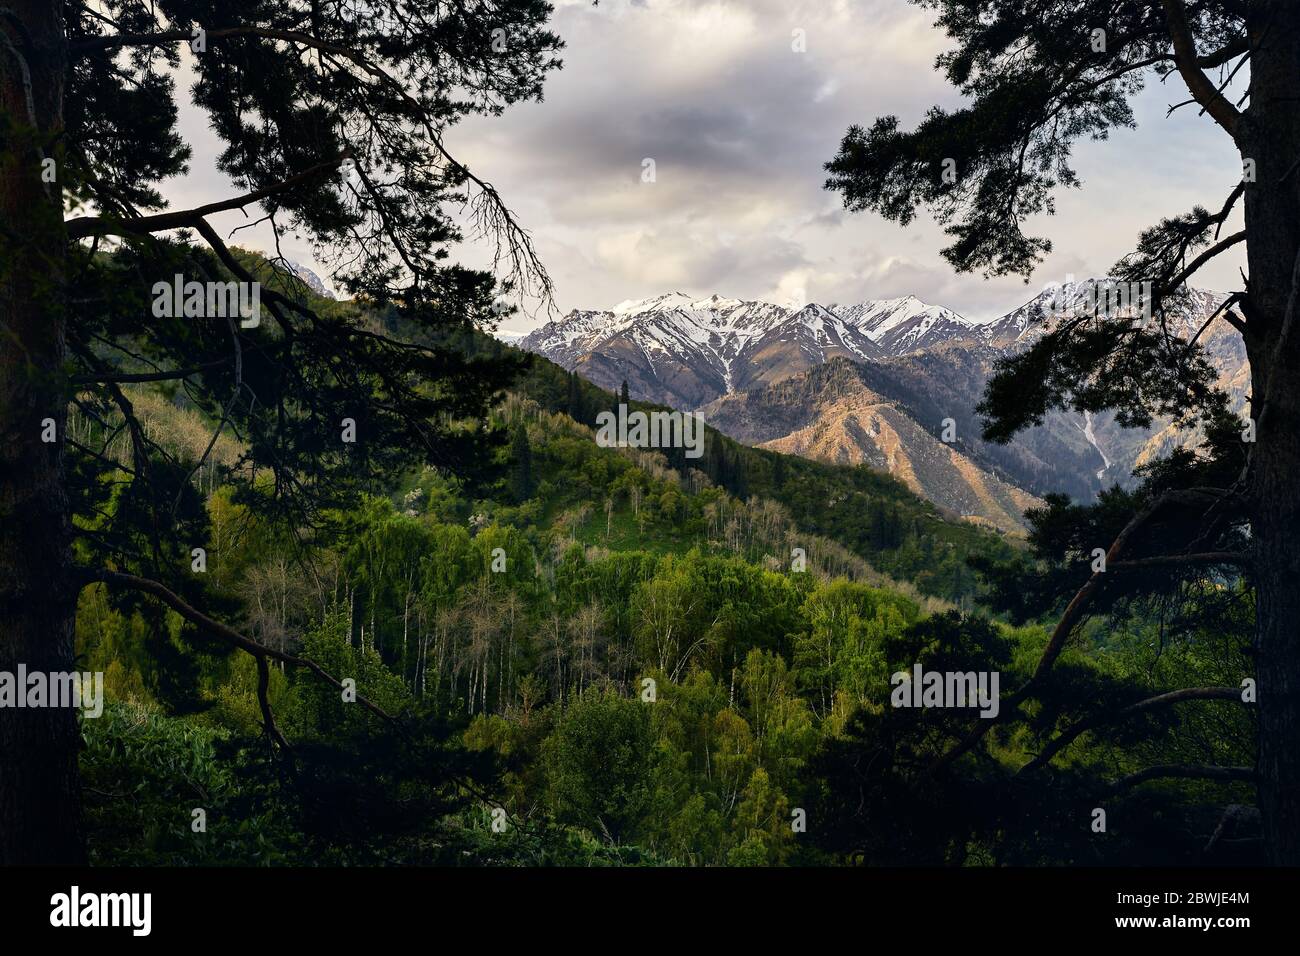 Beautiful scenery of snowy mountains at cloudy sunrise sky framing with pine trees. Outdoor and hiking concept Stock Photo